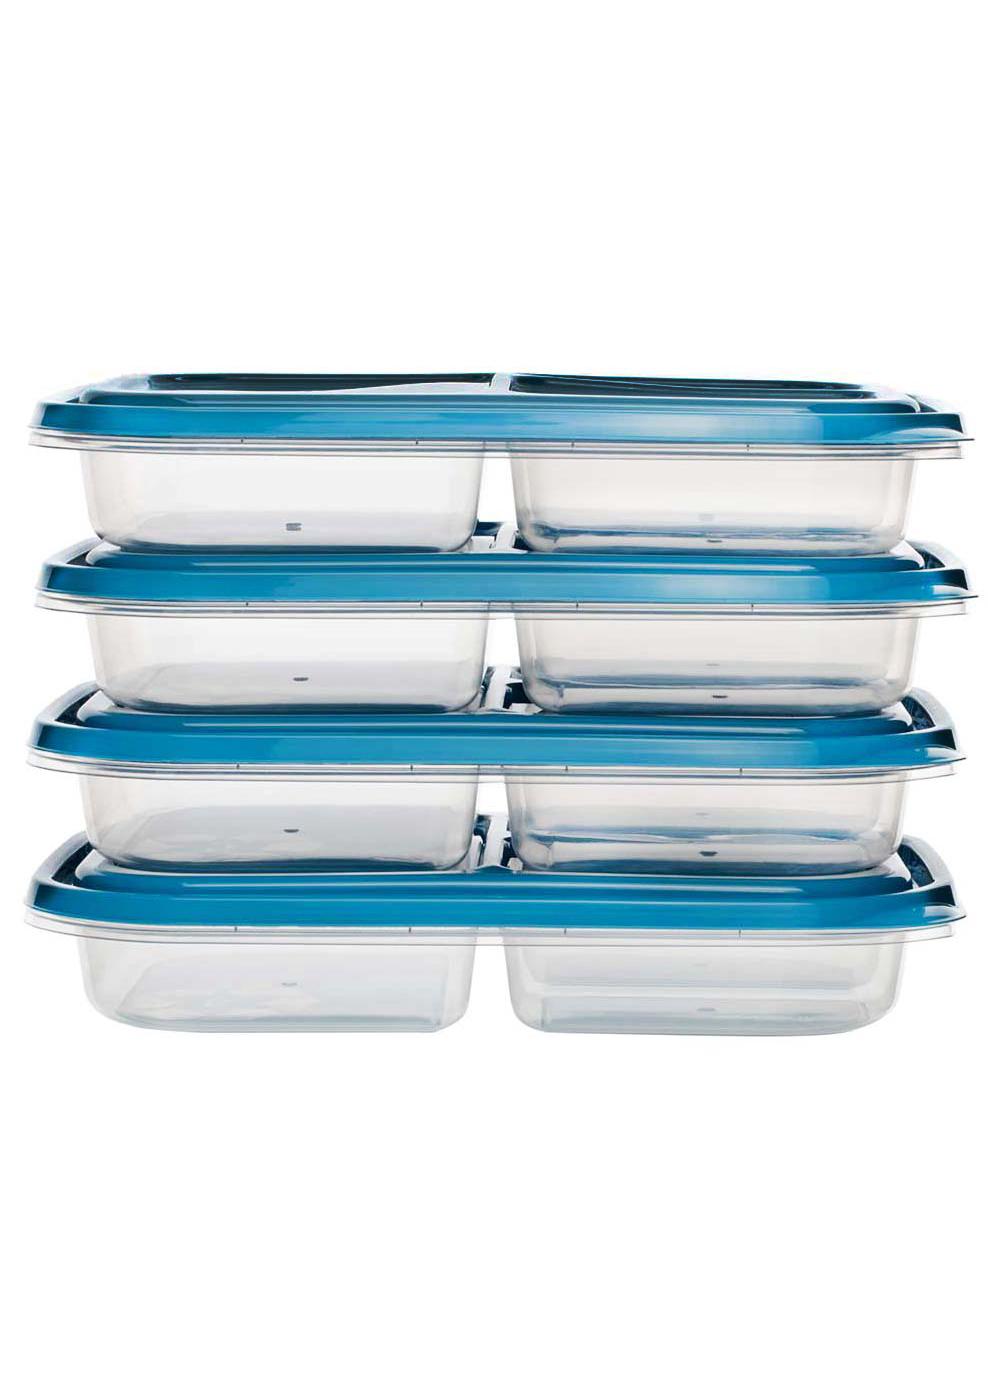 GoodCook EveryWare Lunch Box Containers; image 3 of 4